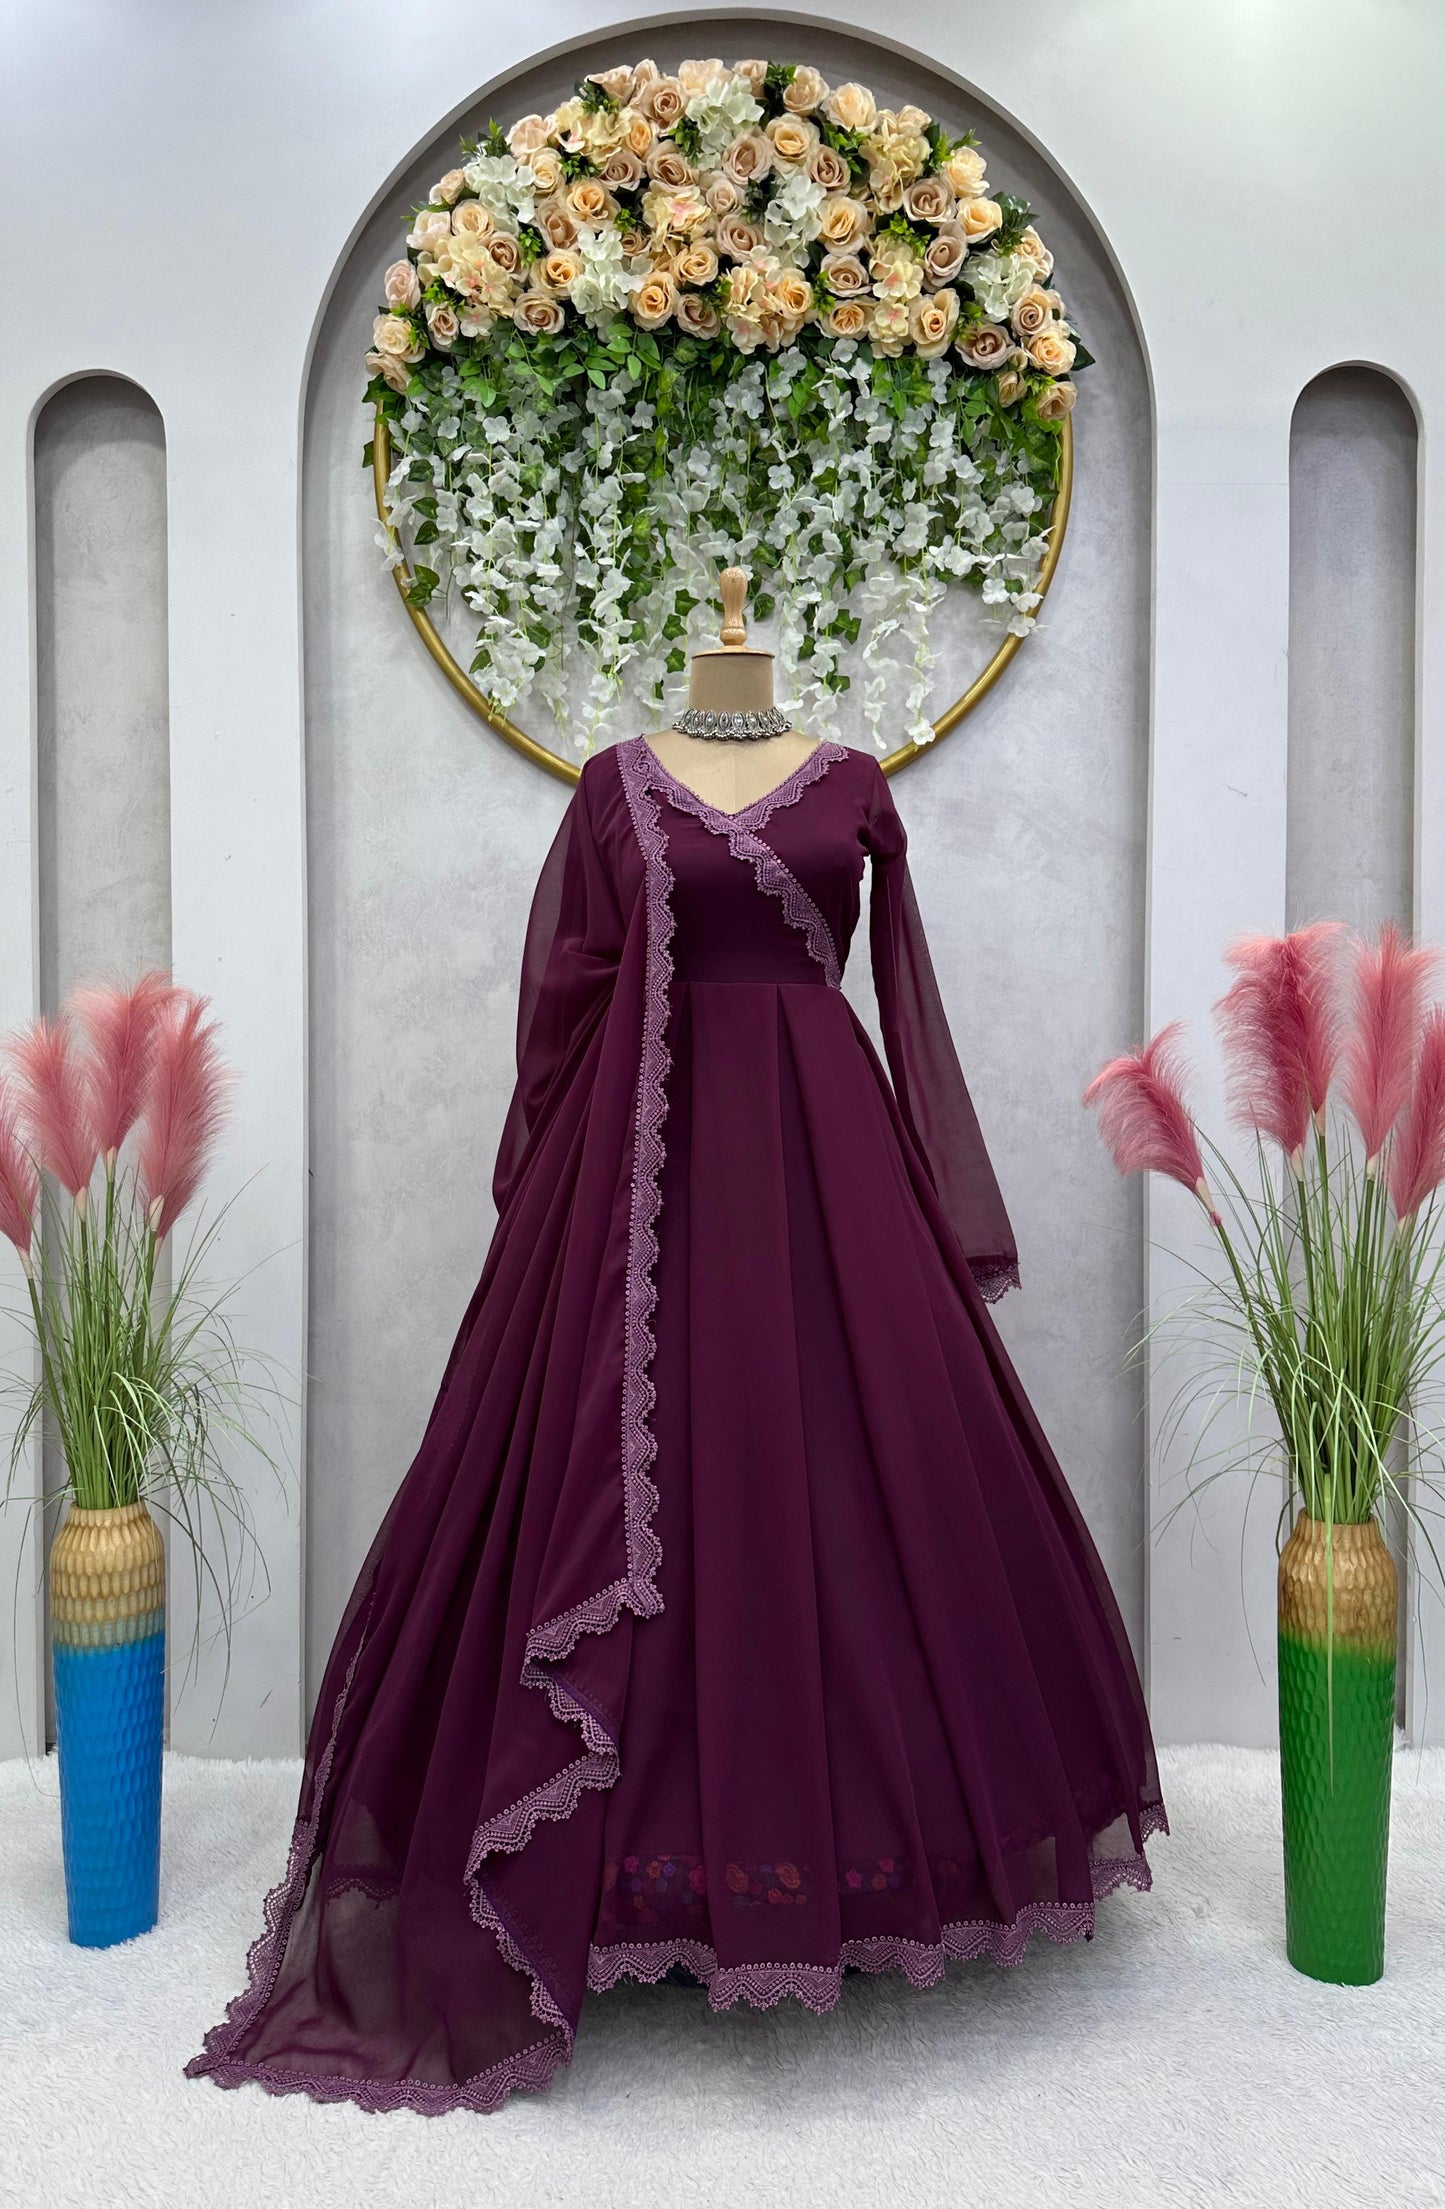 Buy Latest Wine Color Indian Gown Online at Best Price